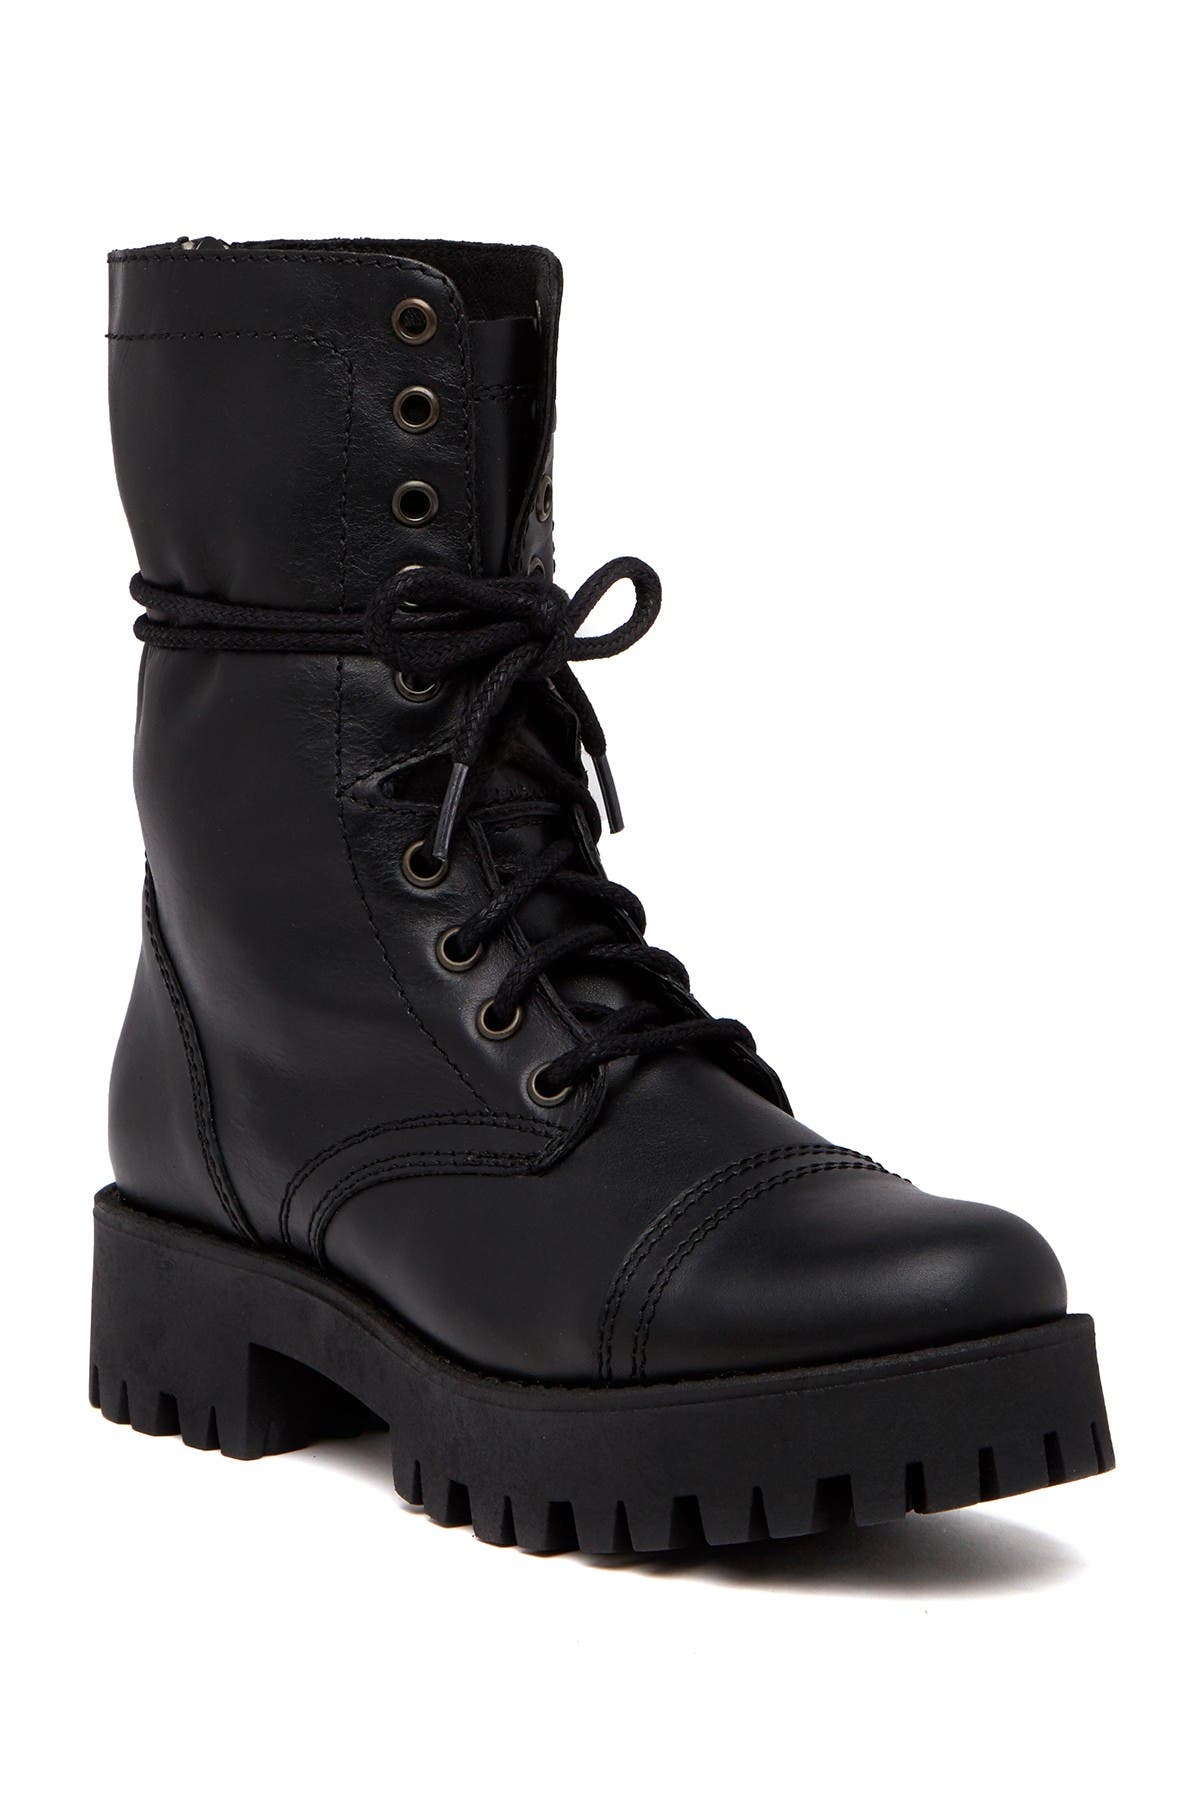 Steve Madden | Olly Lace-Up Leather 